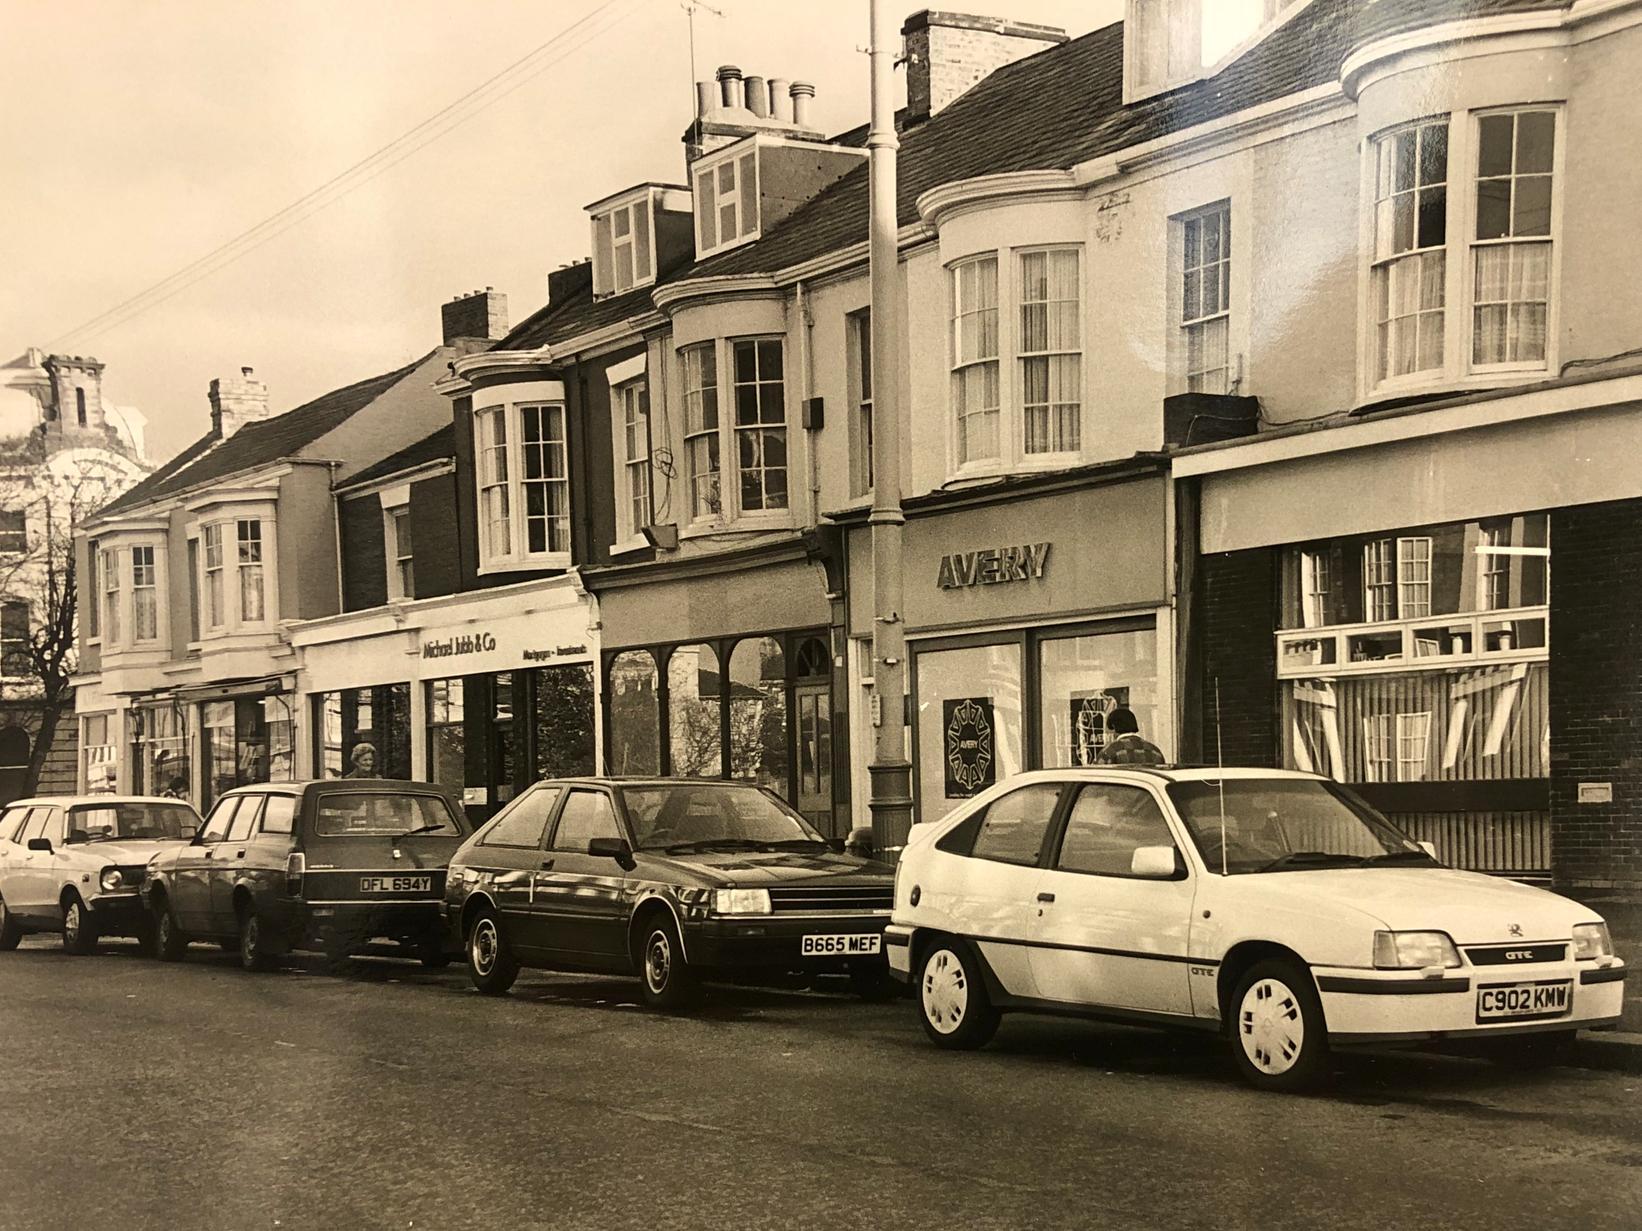 The design of these cars show how much time has passed. While the buildings are still there today, the businesses they house have changed - do you remember these?